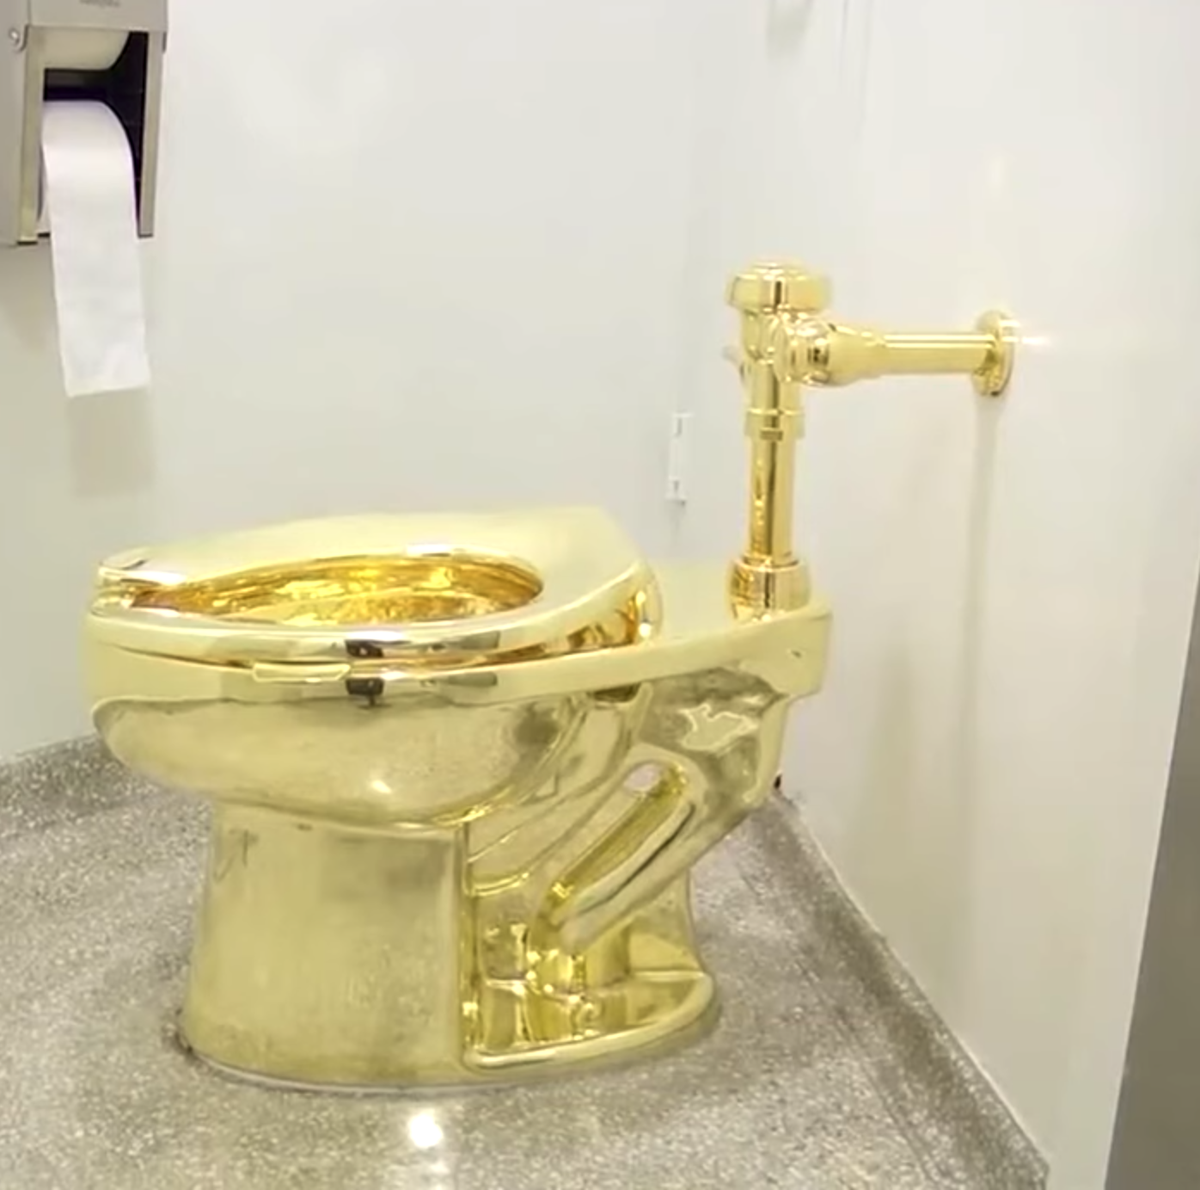 On the throne: what it's like to use the Guggenheim's solid gold